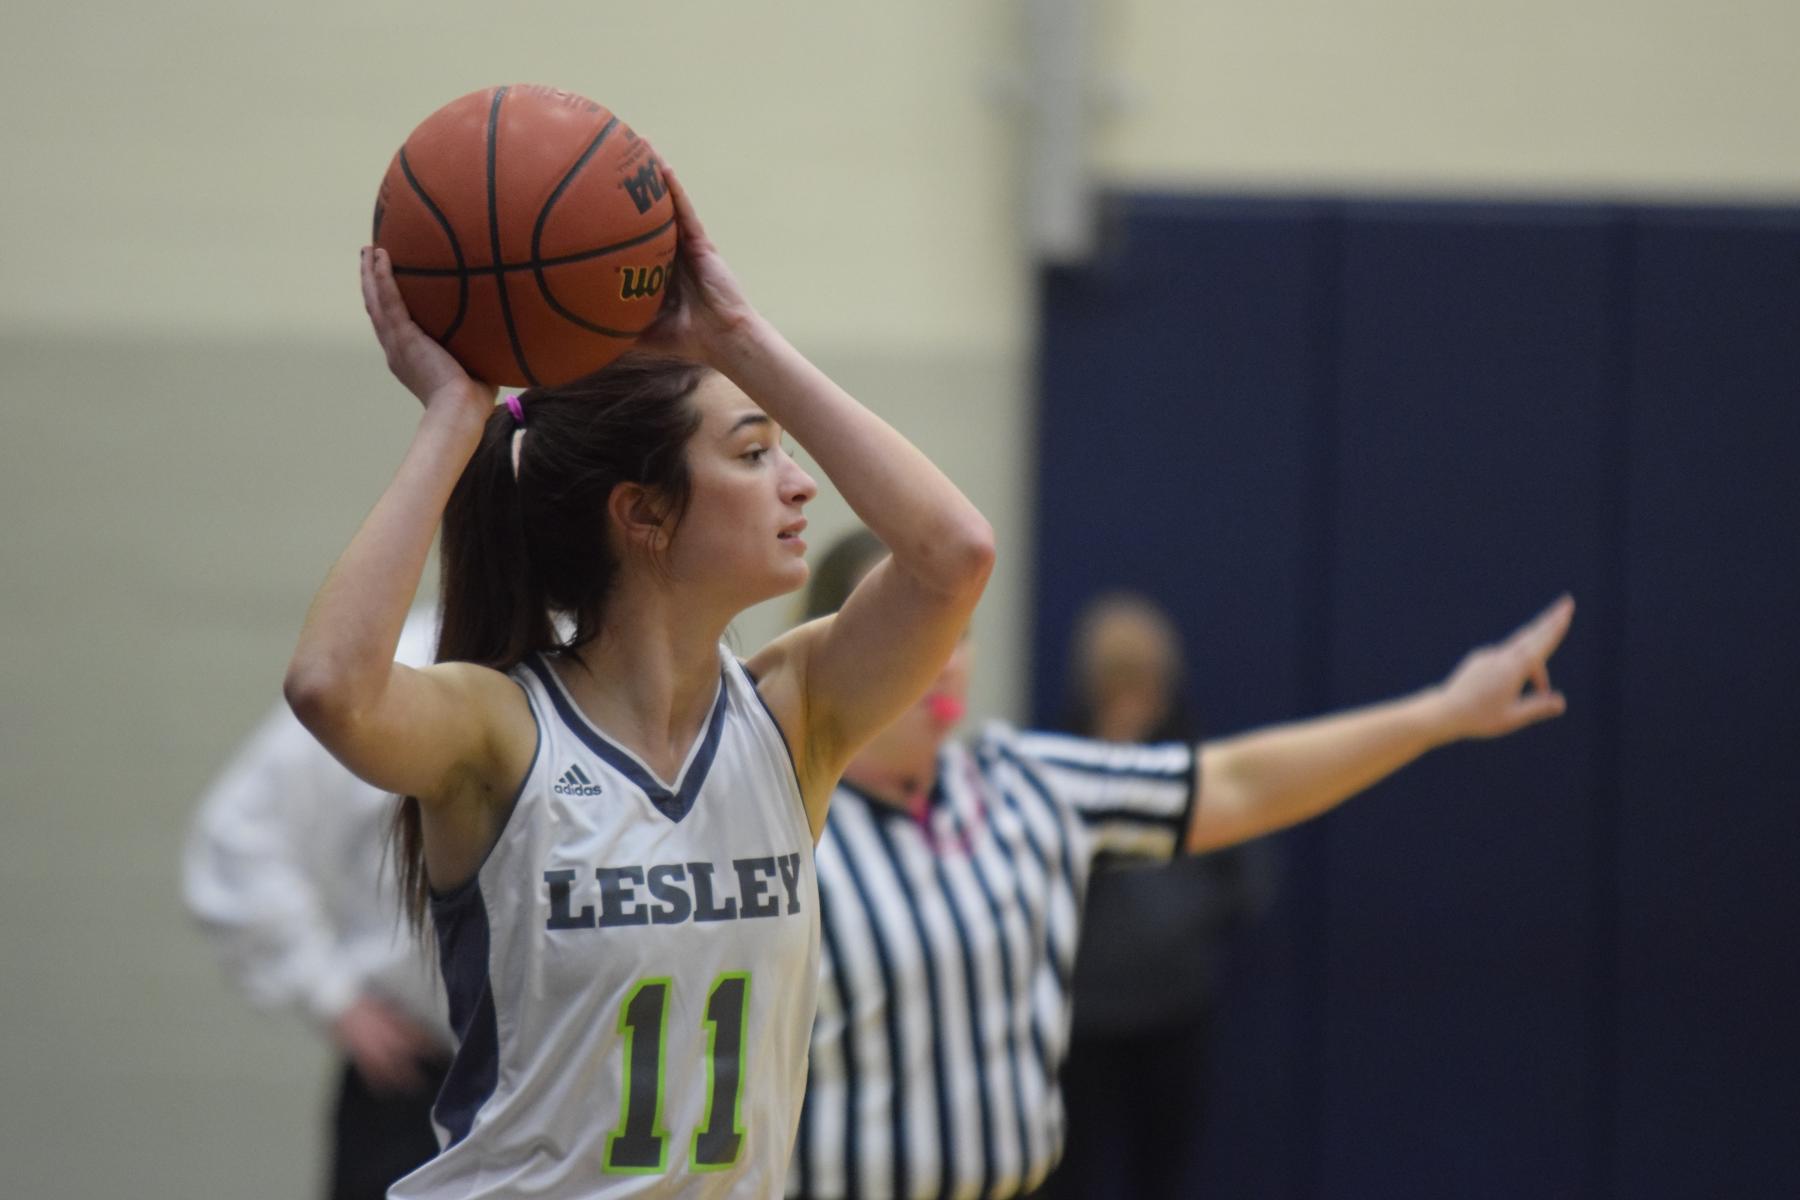 Mitchell's Balanced Offense Too Much For Women's Basketball